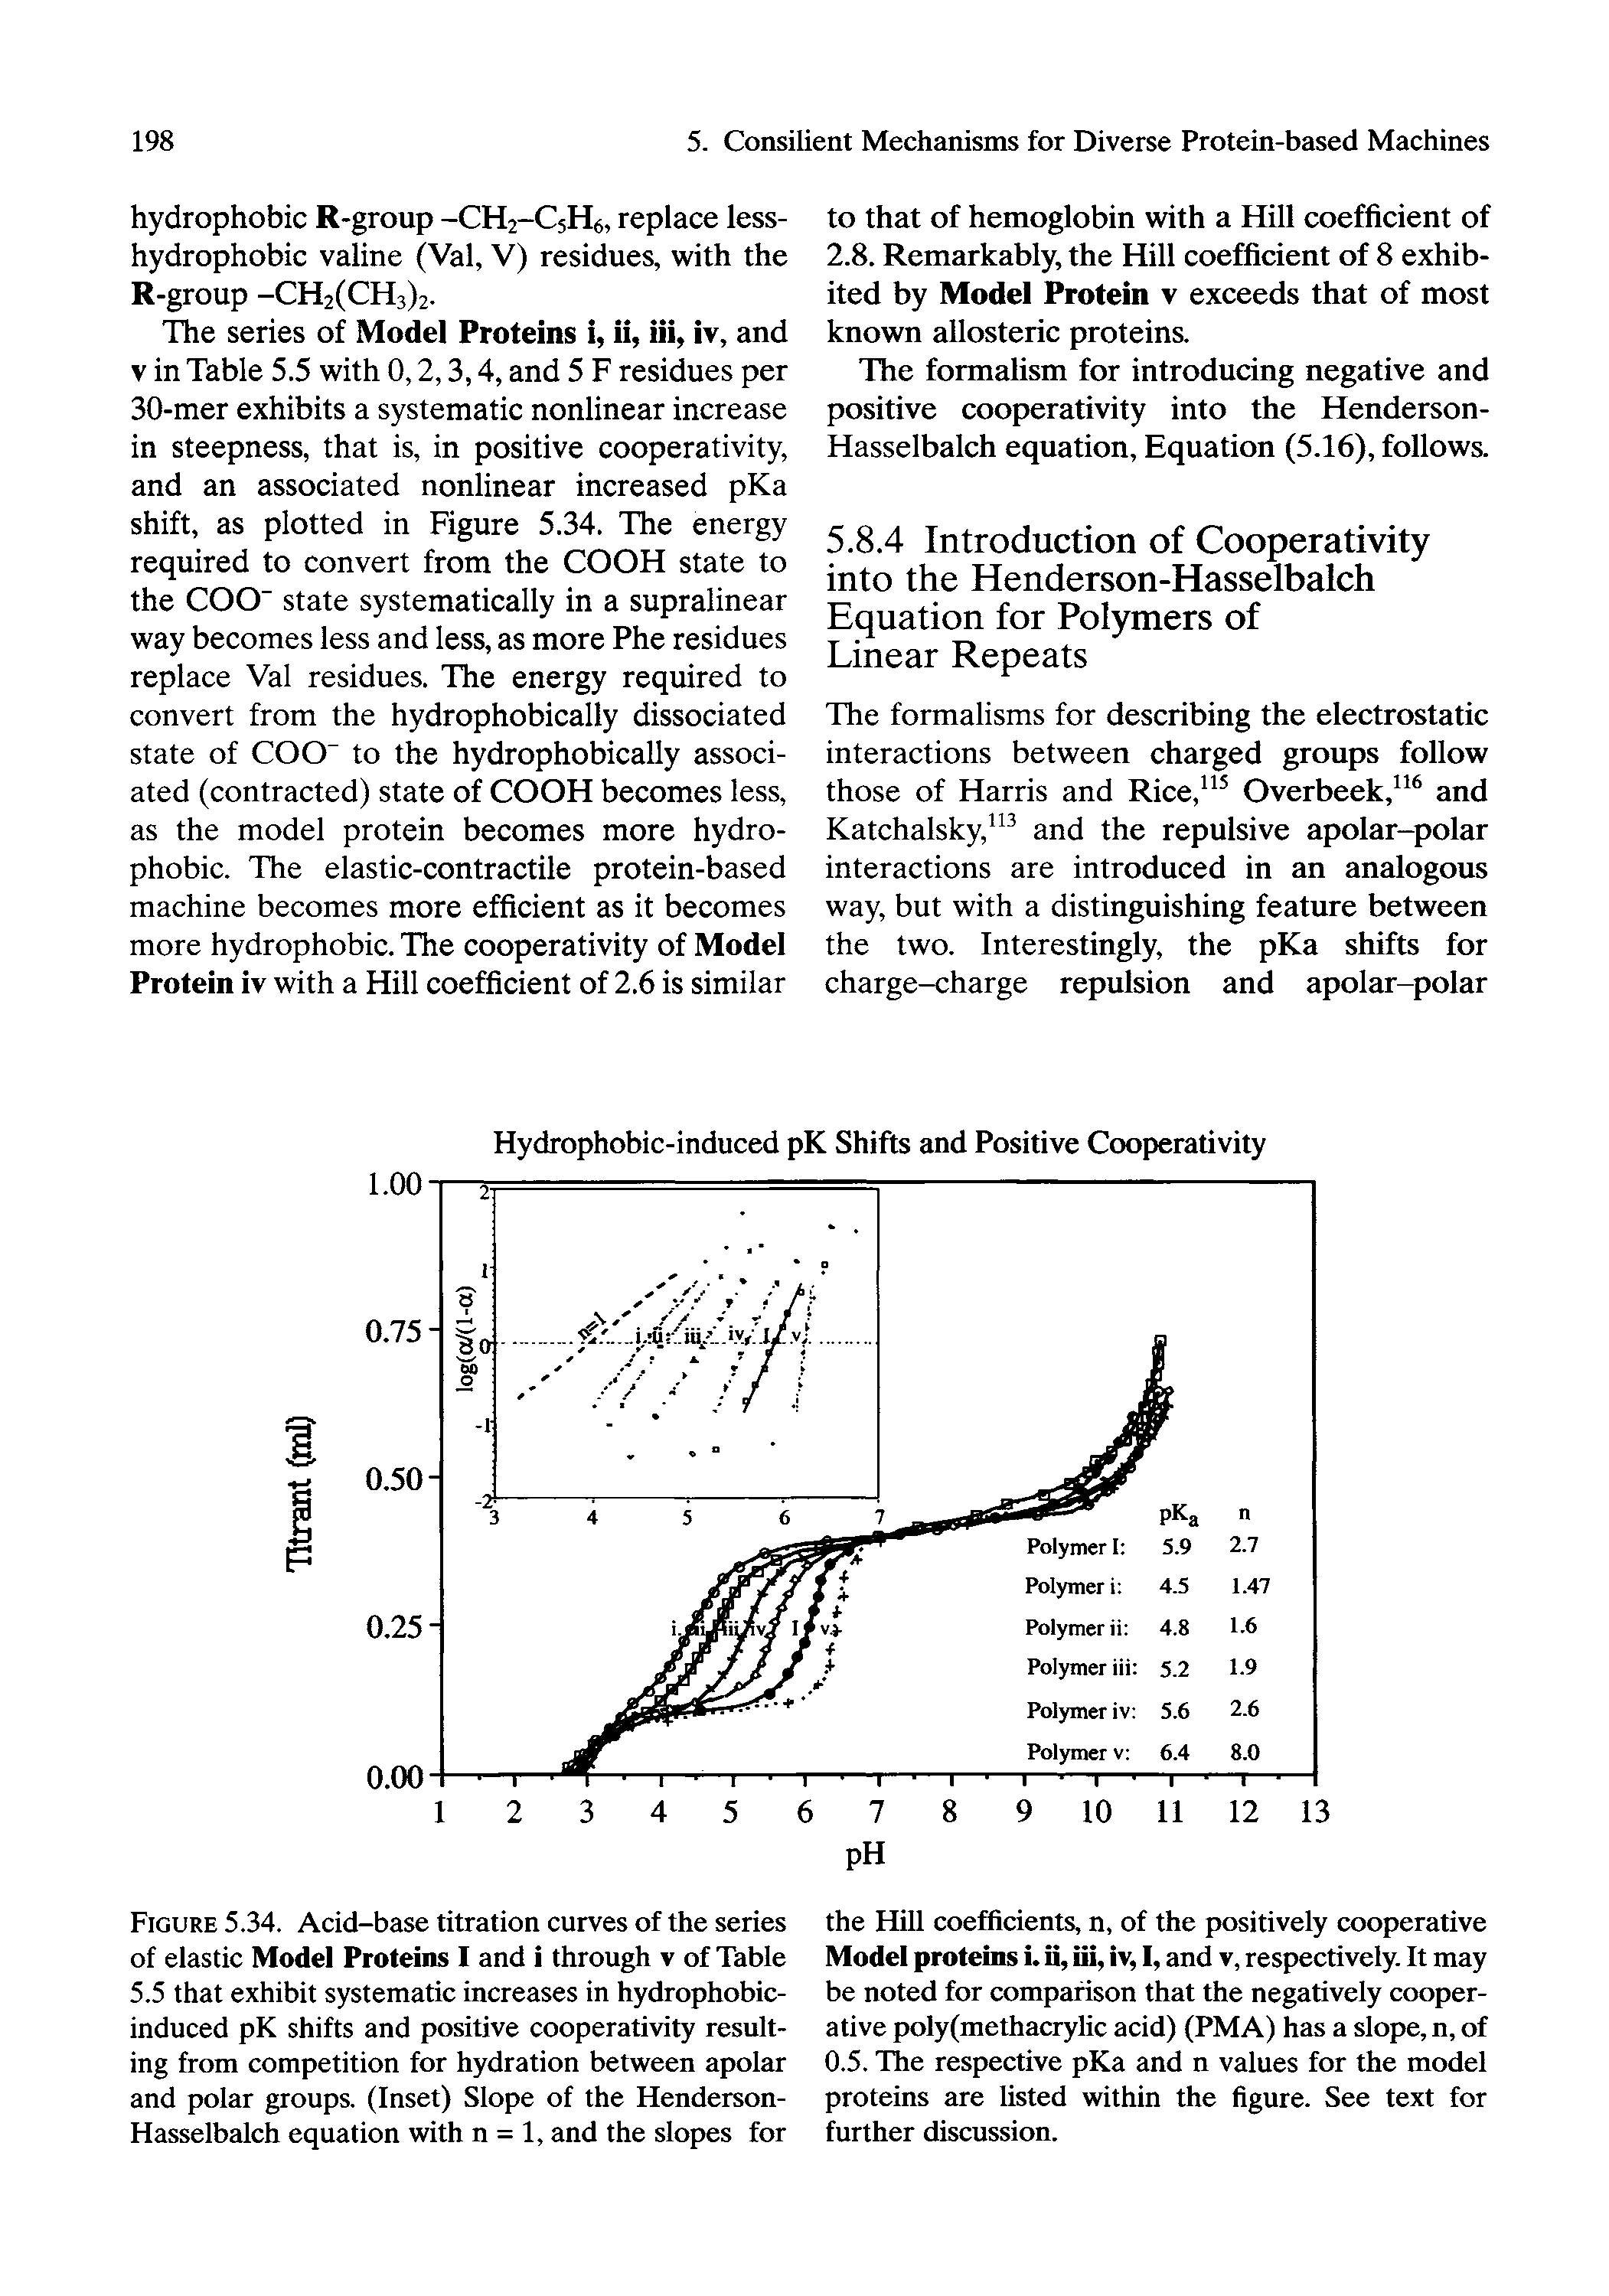 Figure 5.34. Acid-base titration curves of the series of elastic Model Proteins I and i through v of Table 5.5 that exhibit systematic increases in hydrophobic-induced pK shifts and positive cooperativity resulting from competition for hydration between apolar and polar groups. (Inset) Slope of the Henderson-Hasselbalch equation with n = 1, and the slopes for...